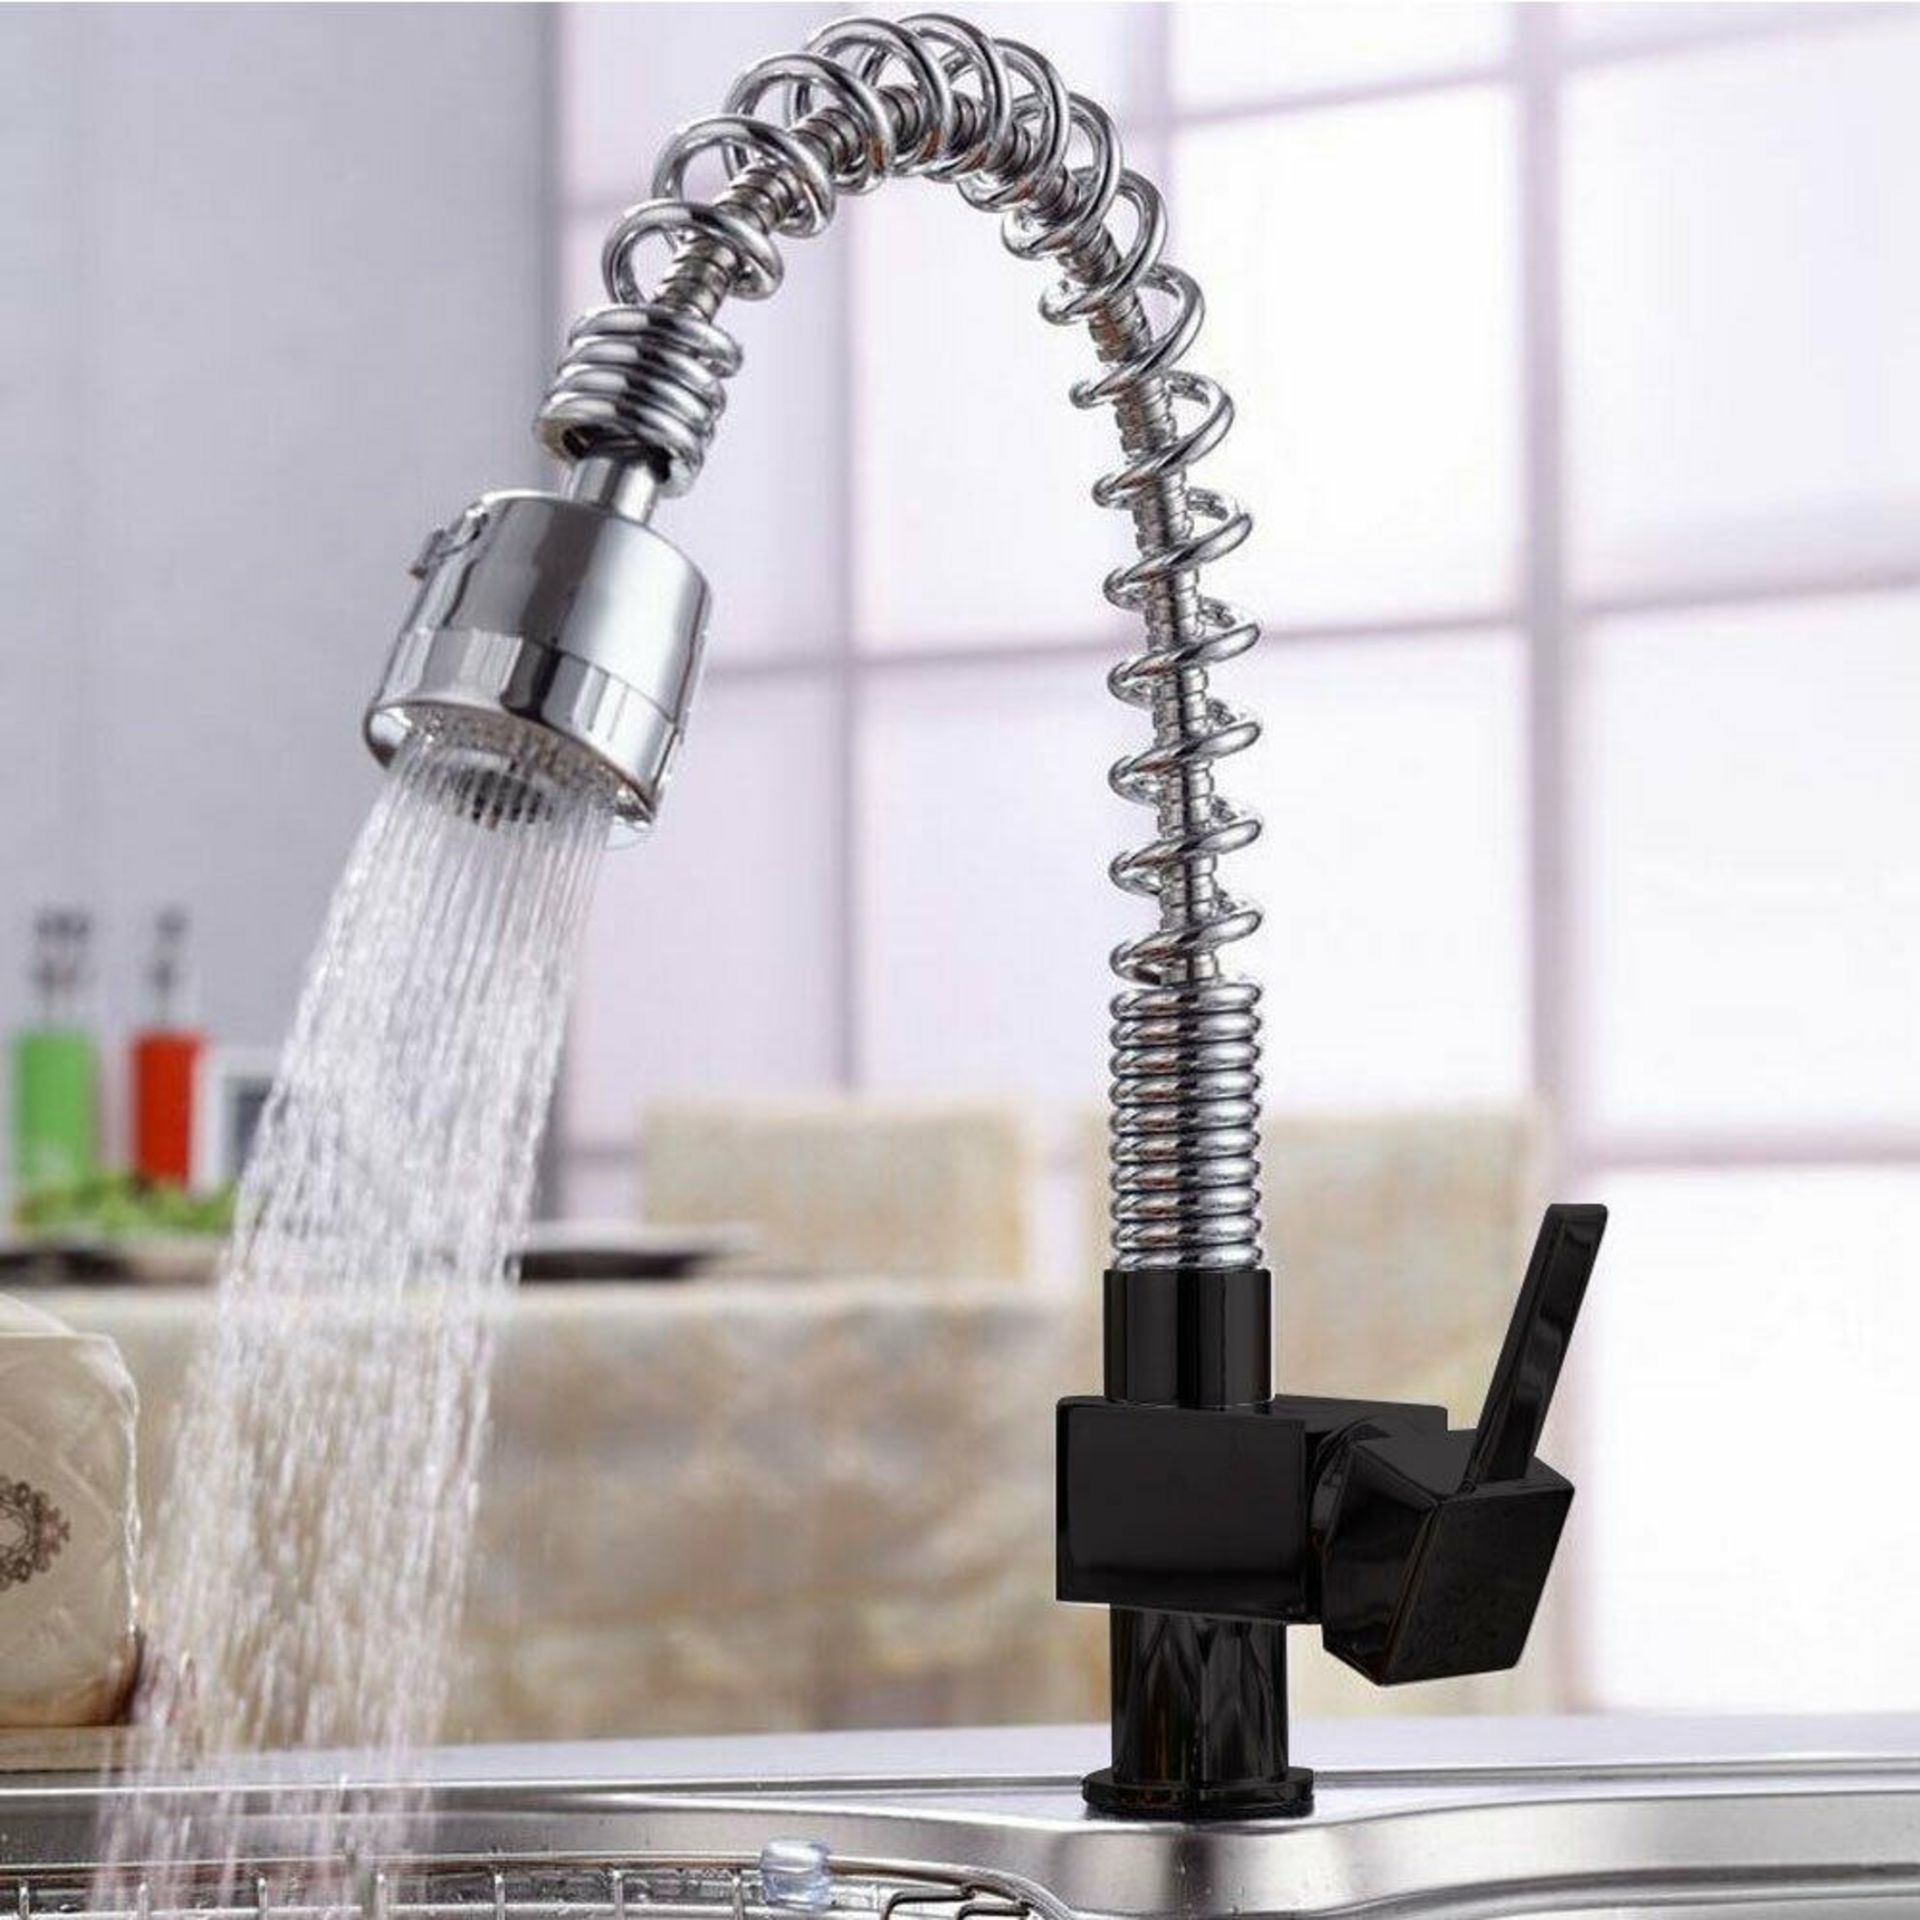 (KL168) Delta Chrome & Black Monobloc Kitchen Tap Swivel Pull Out Spray Mixer. RRP £249.99. - Image 2 of 3